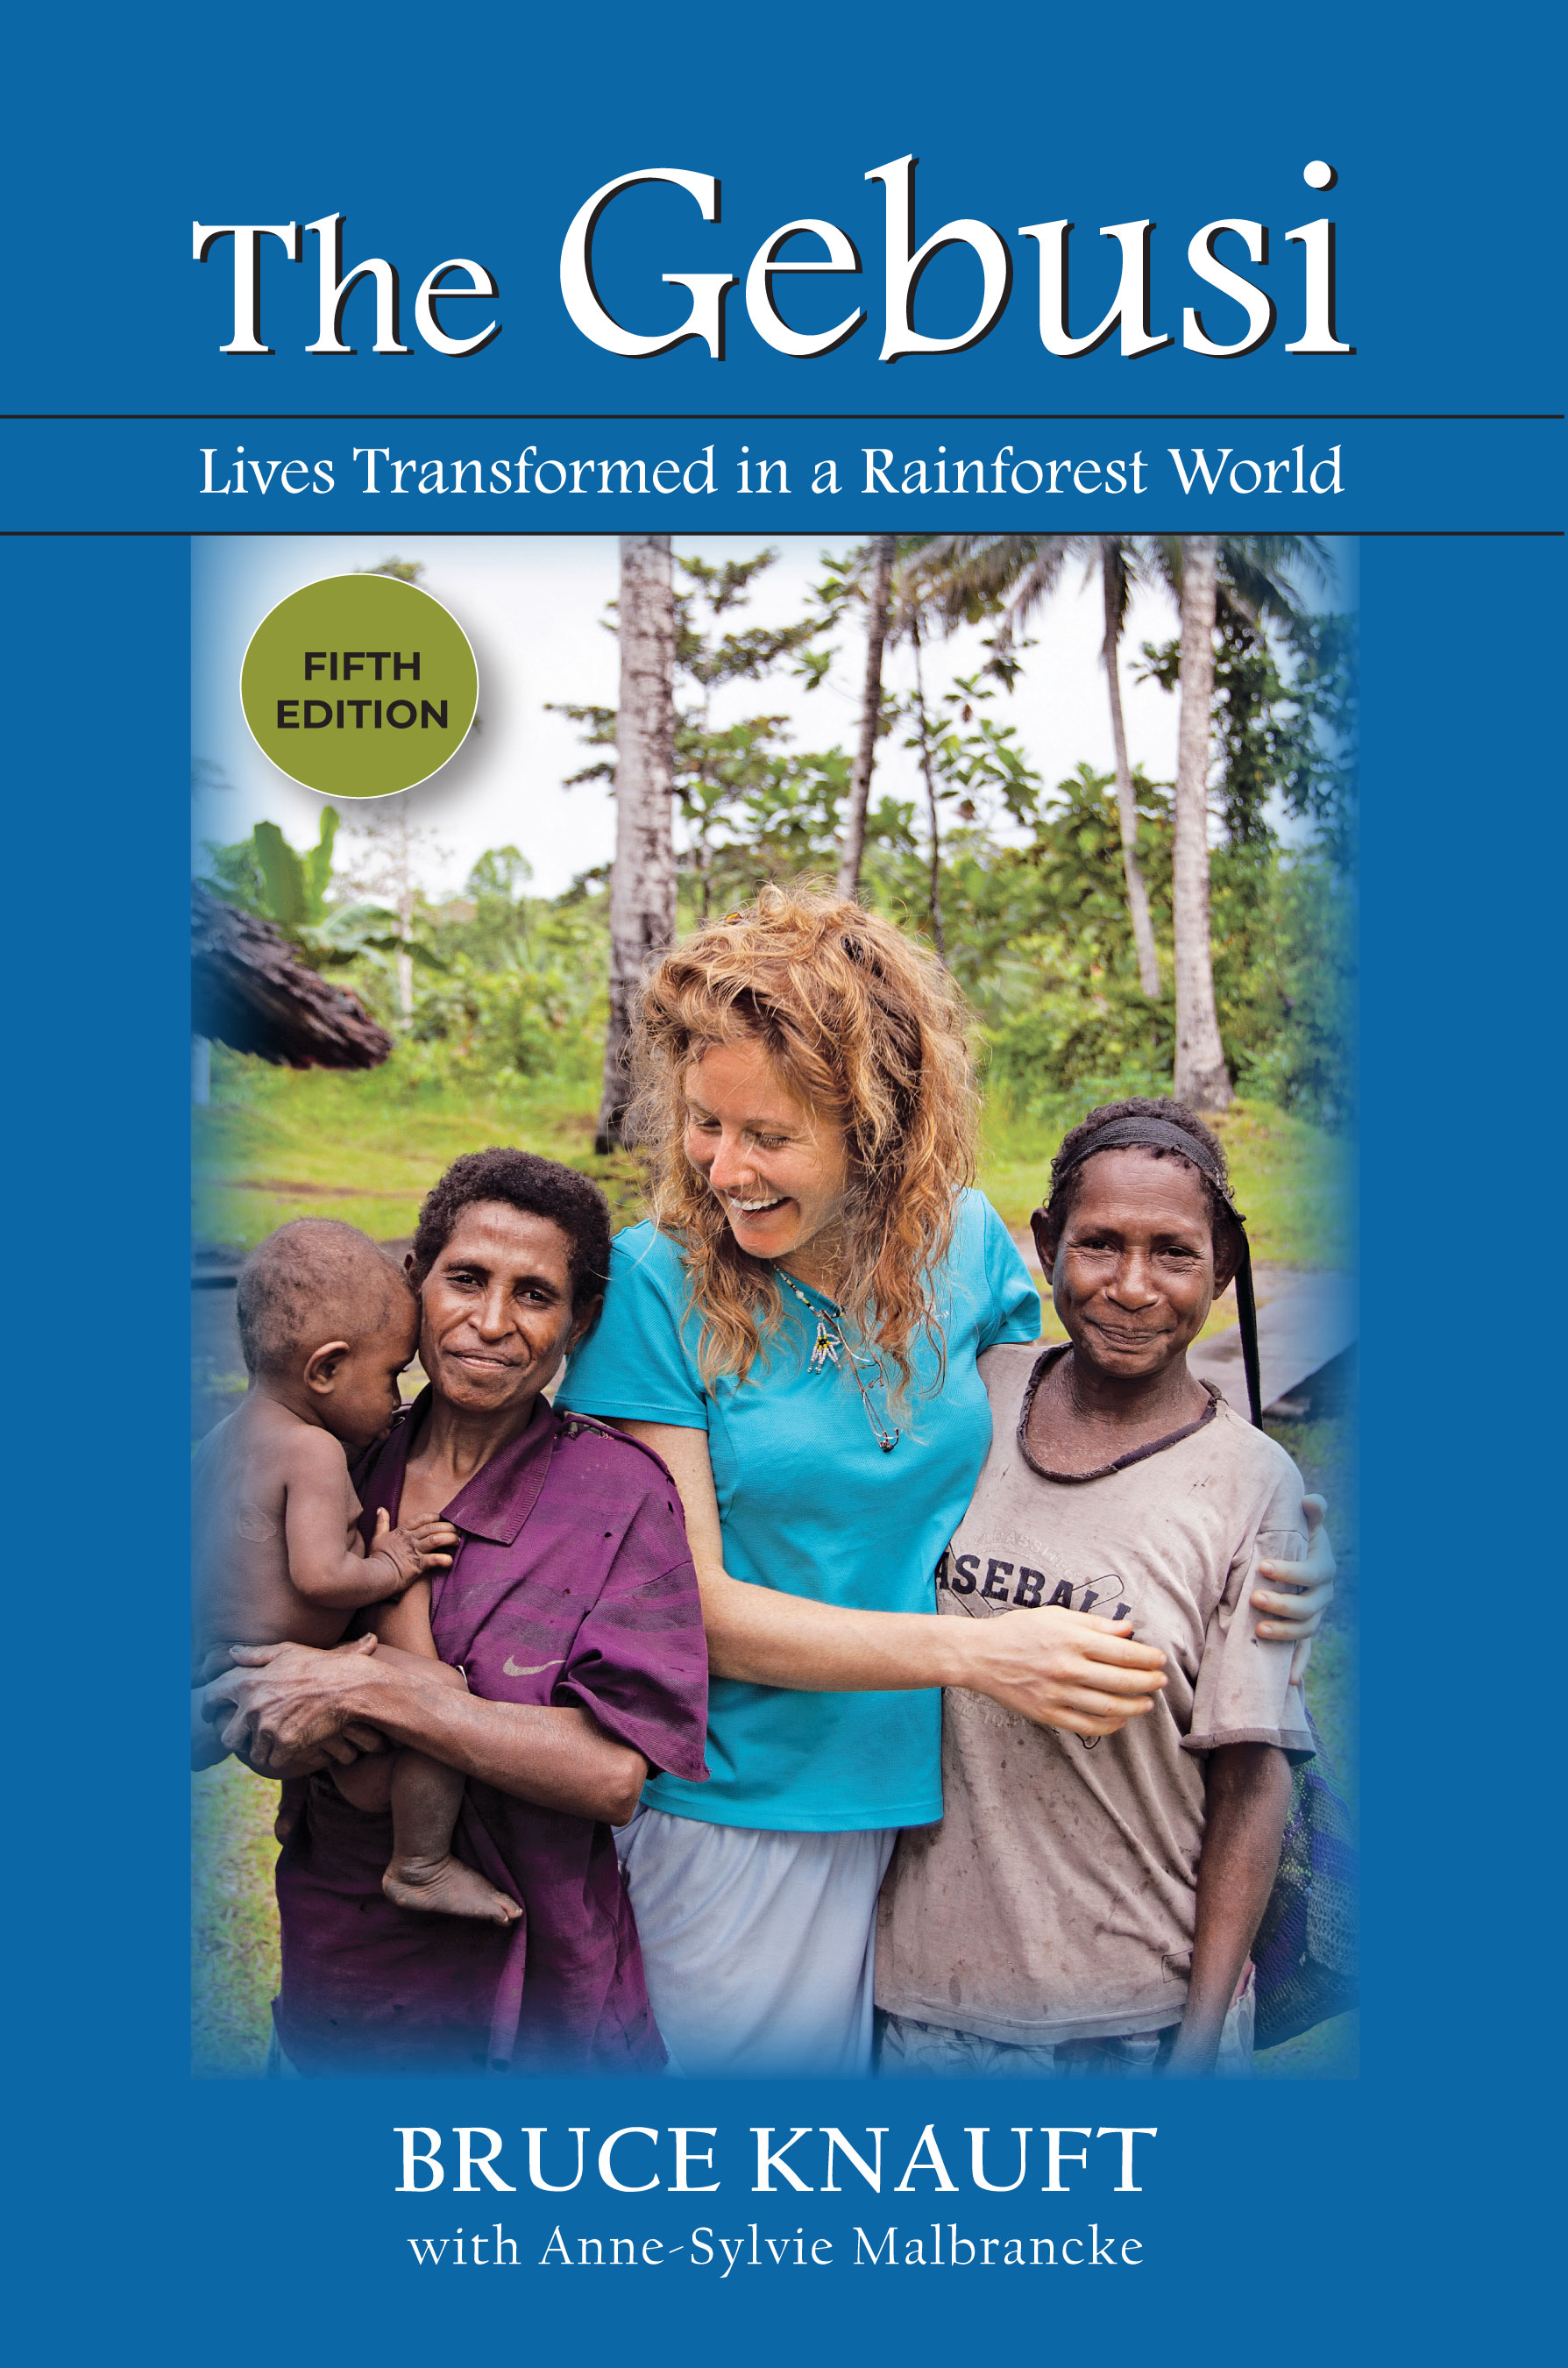 The Gebusi: Lives Transformed in a Rainforest World by Bruce  Knauft with Anne-Sylvie  Malbrancke